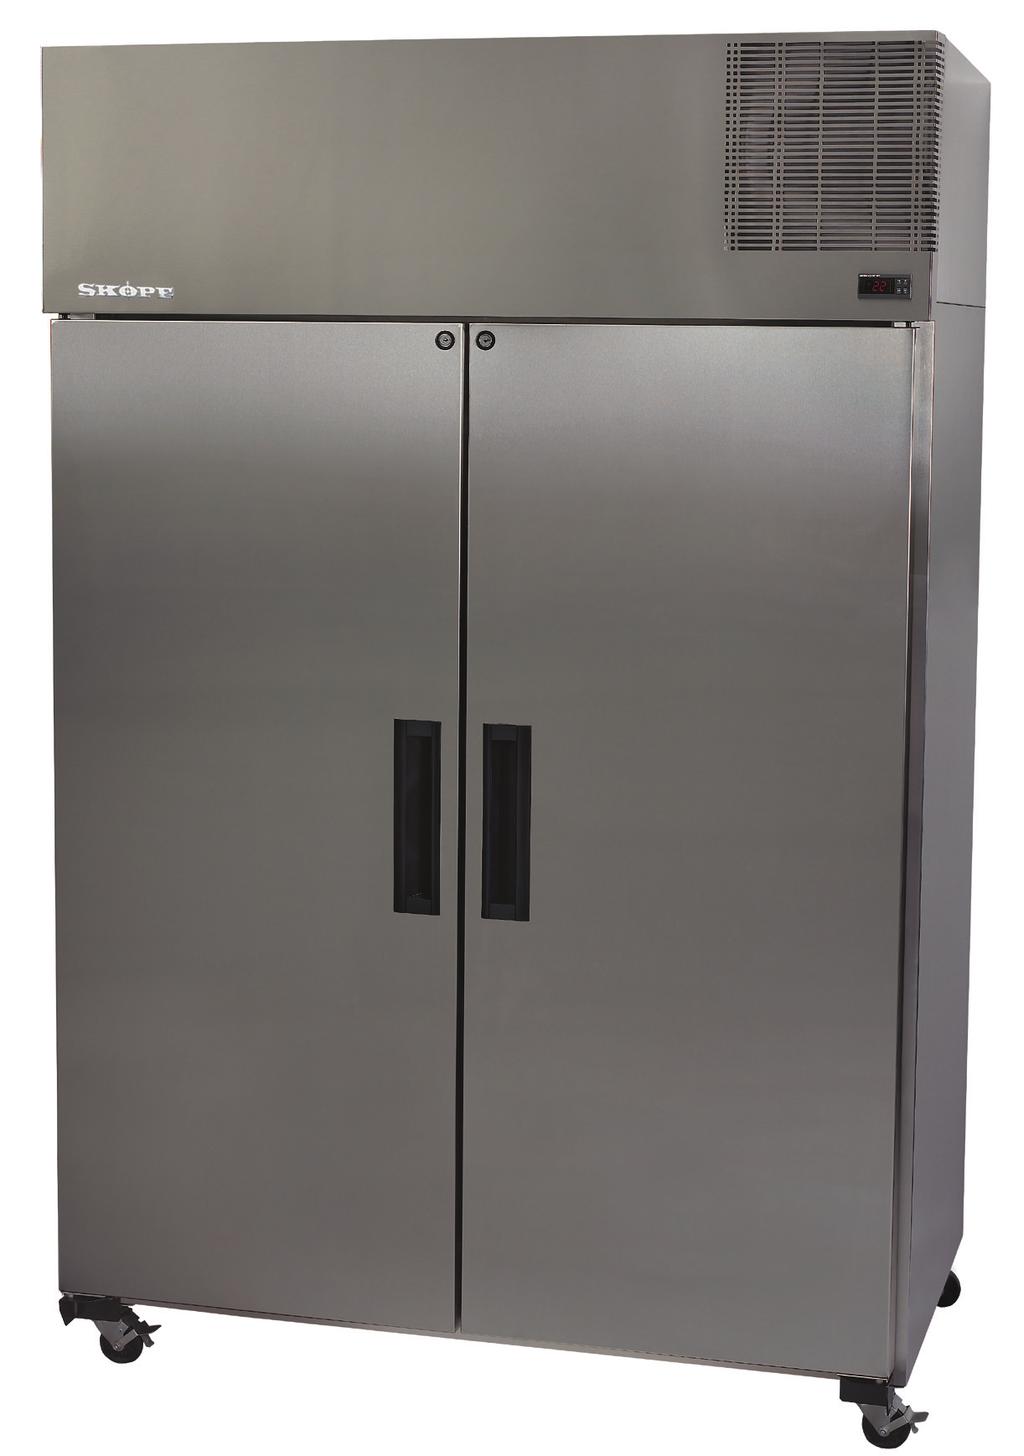 PEGASUS SERIES Premium Range Food Service / Upright Deed to be dependable, these upright chillers and freezers incorporate both 1/1 & 2/1 standard Gastronorm tray and shelf width/depth dimensions,